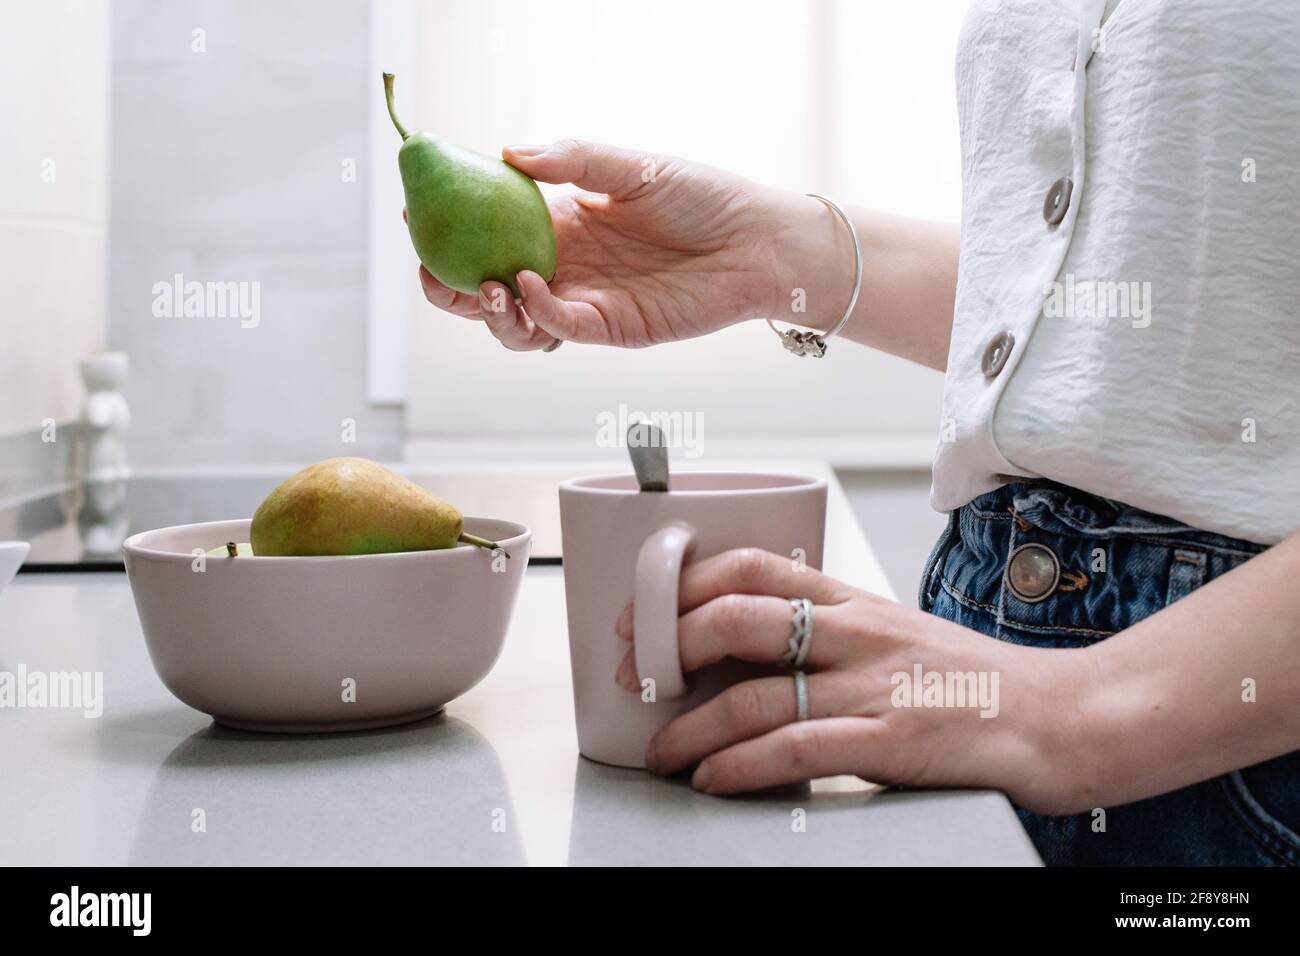 Woman holding fresh ripe pear in kitchen Stock Photo